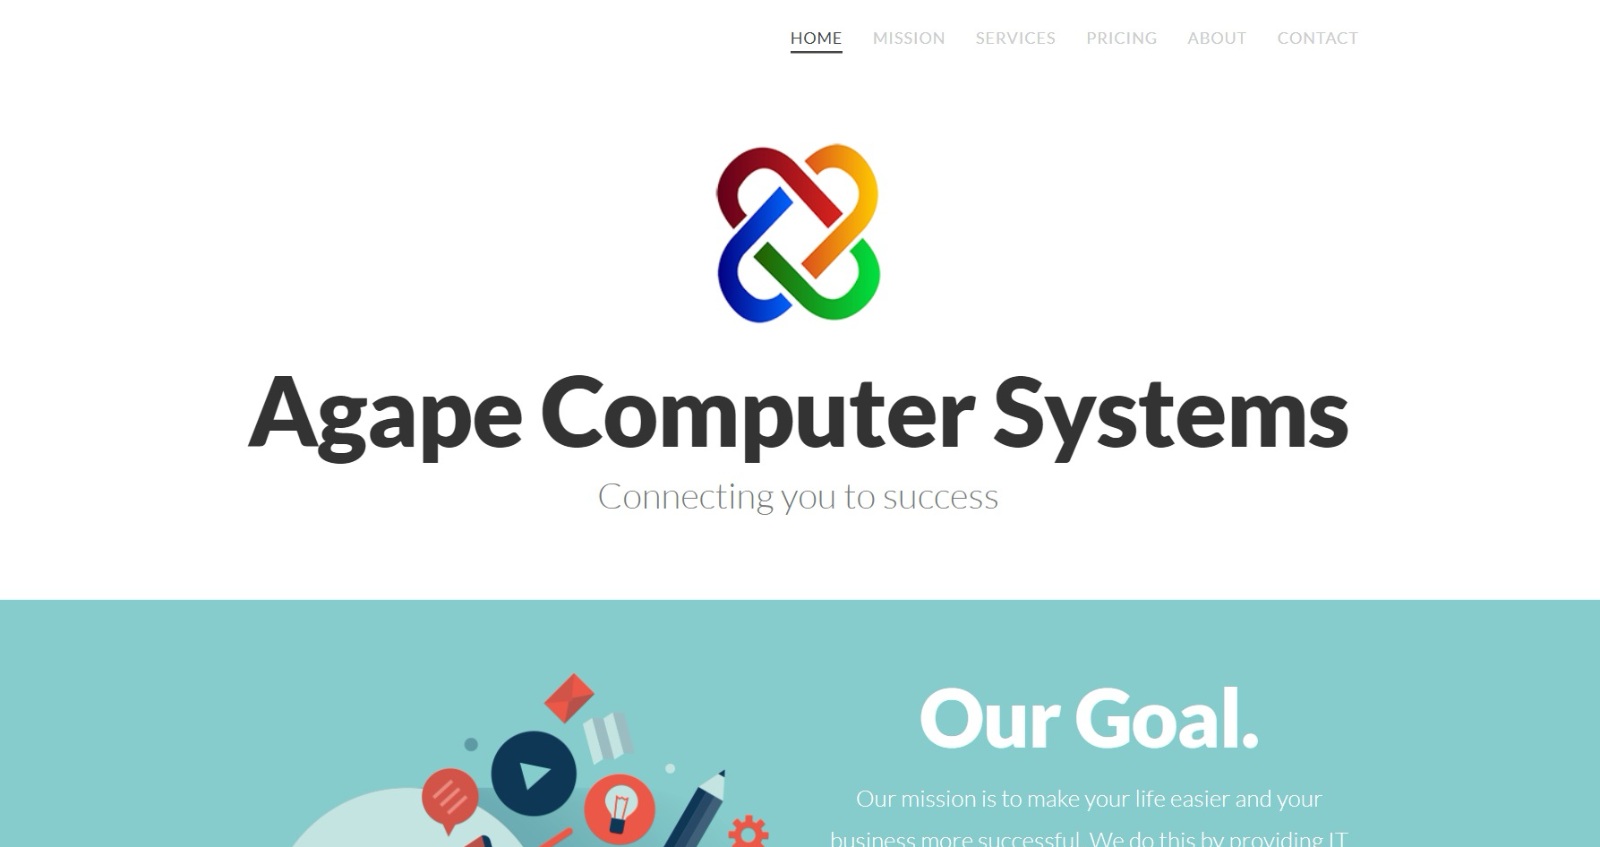 Agape Computer Systems